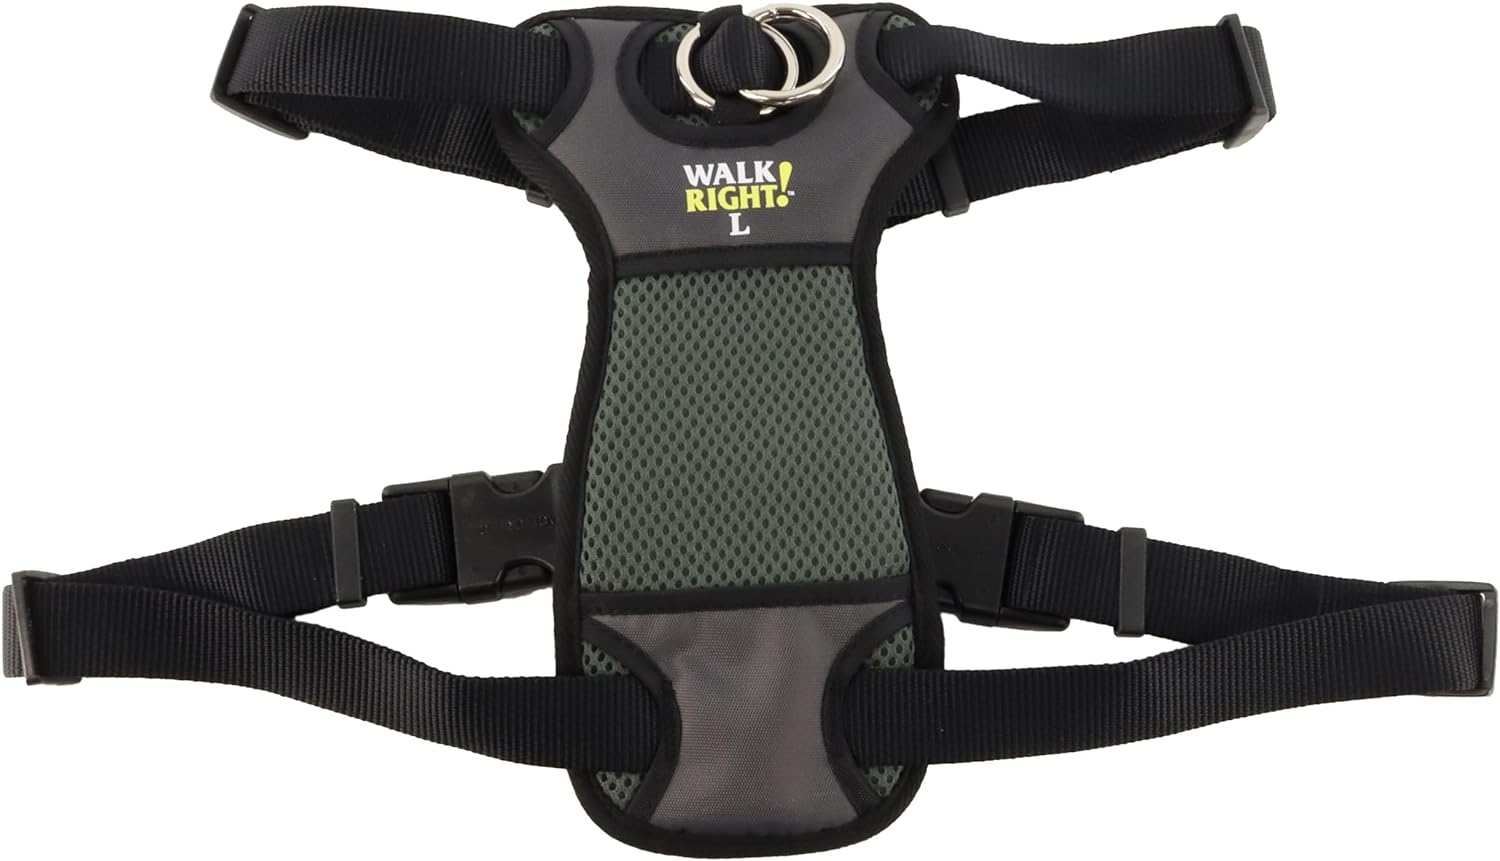 Coastal Pet Walk Right Front-Connect No-Pull Padded Dog Harness - Adjustable Dog Harness - Small Large Dog Harness - Comfortable Harness for Dogs - Quality Dog Supplies - Black, 26-38